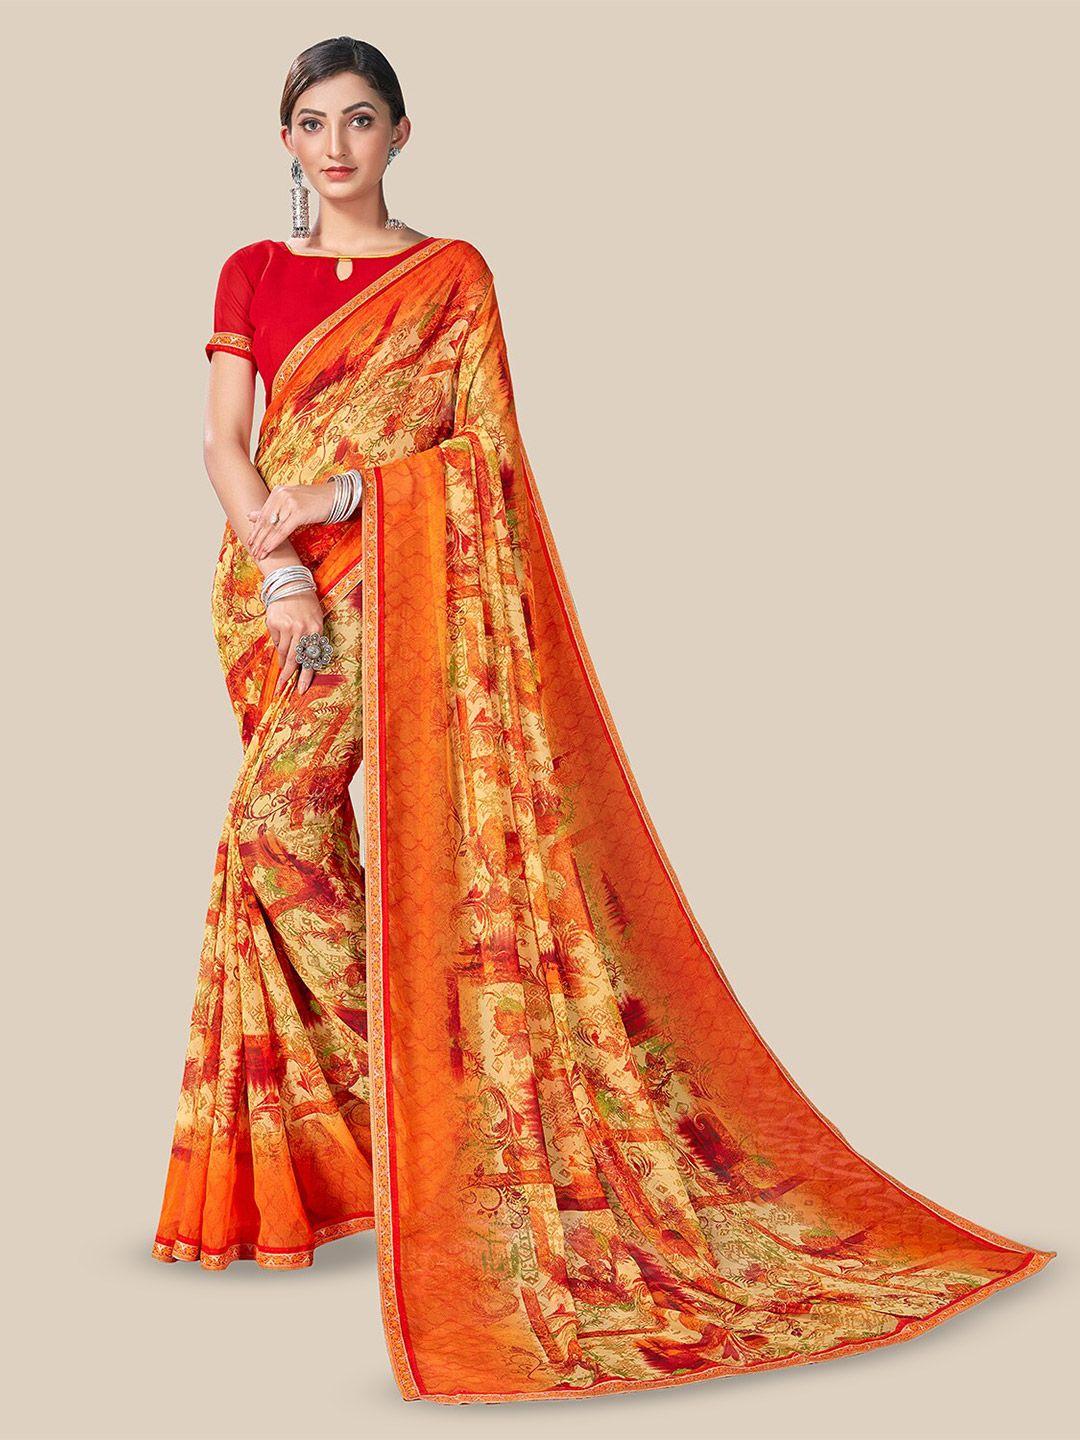 united liberty floral printed pure georgette saree